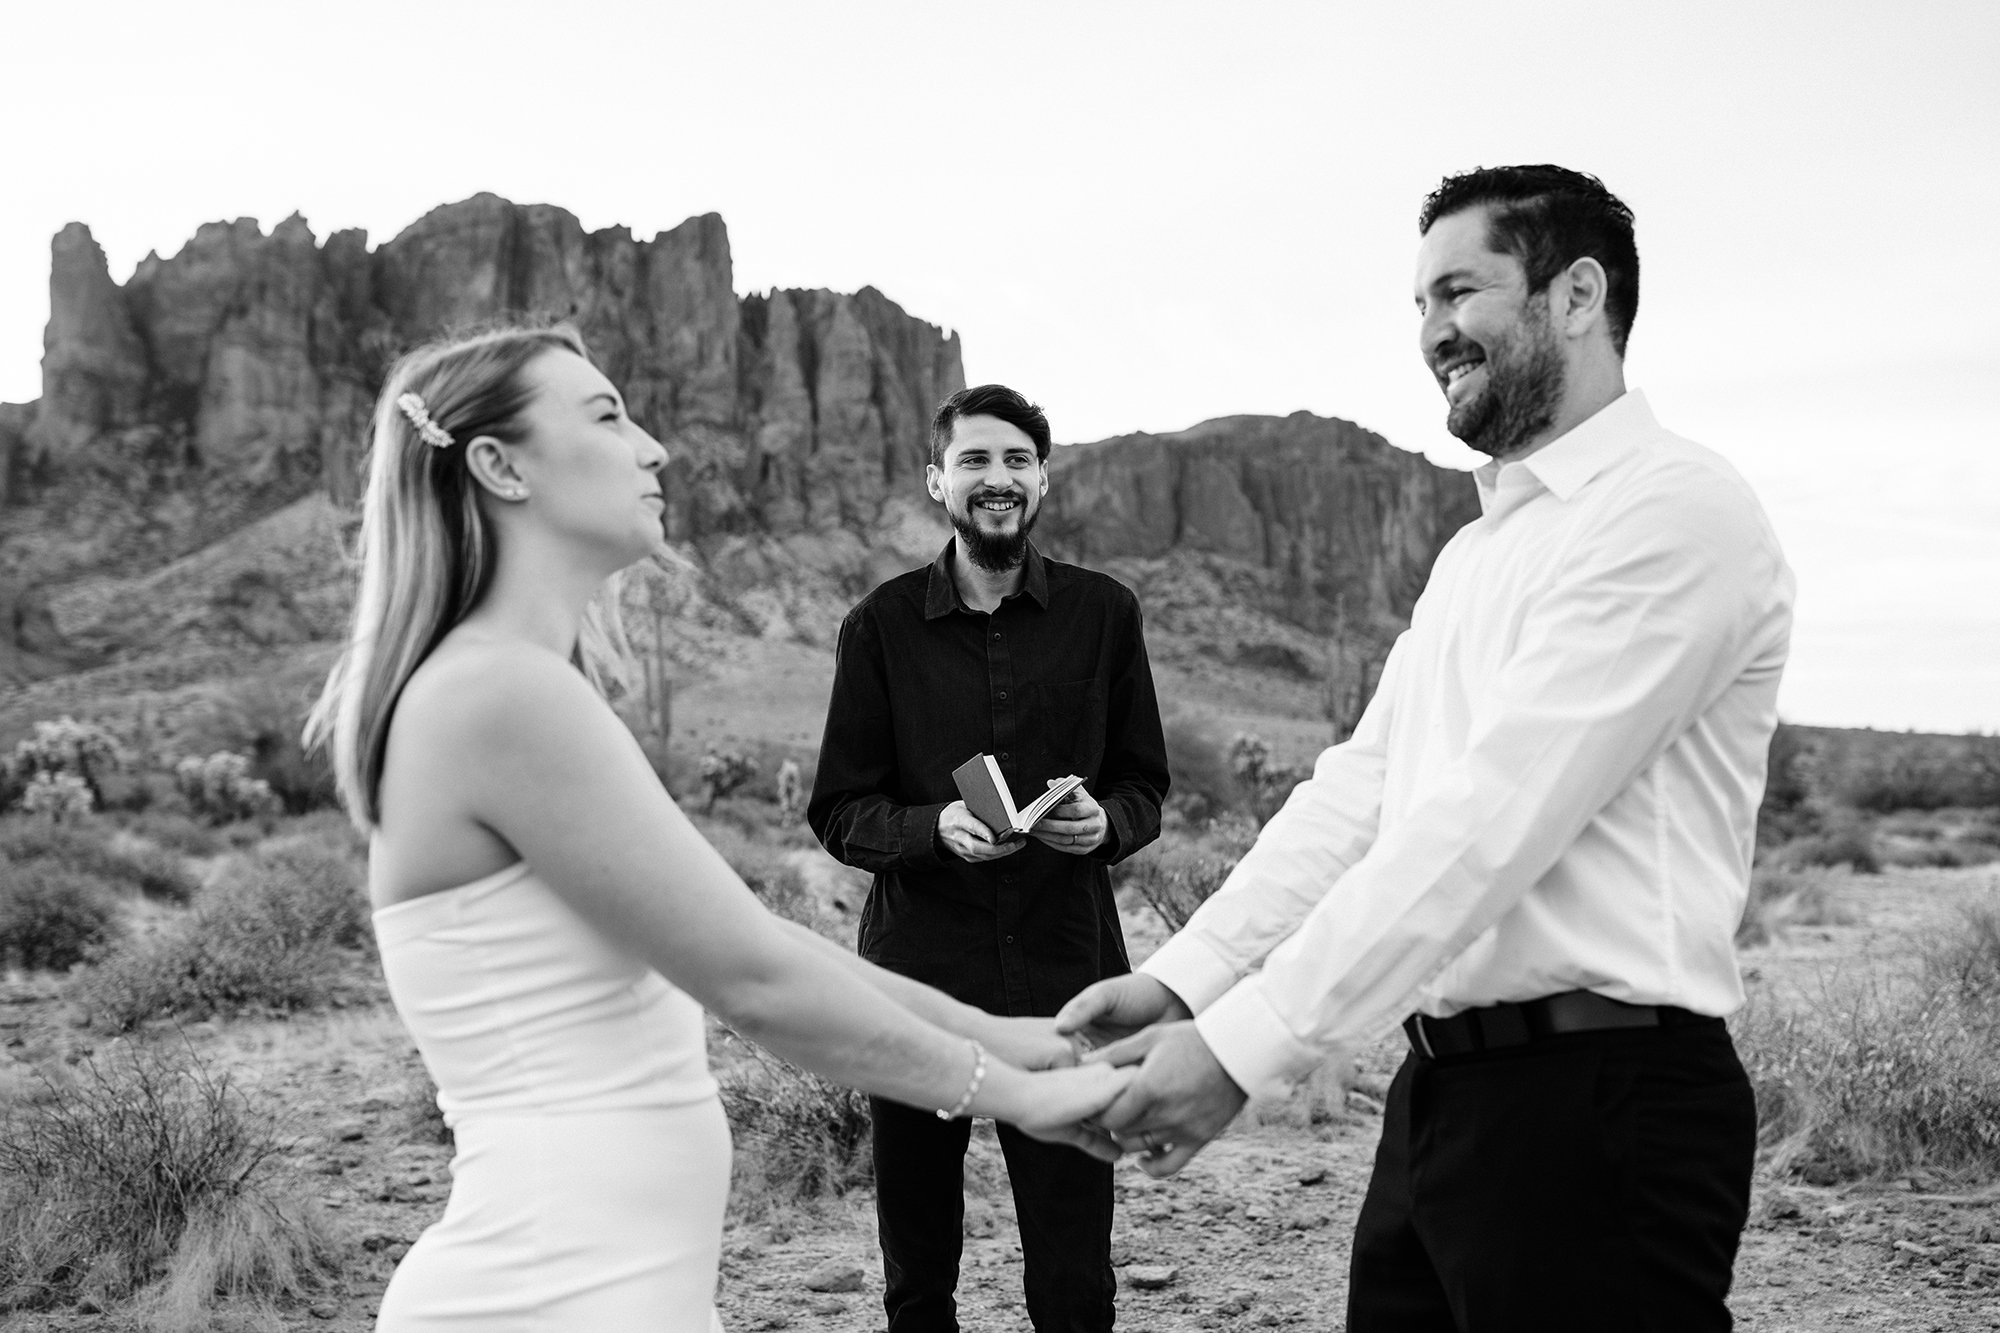 the-joys-of-a-morning-elopement-an-intimate-wedding-in-the-arizona-desert-13.jpg